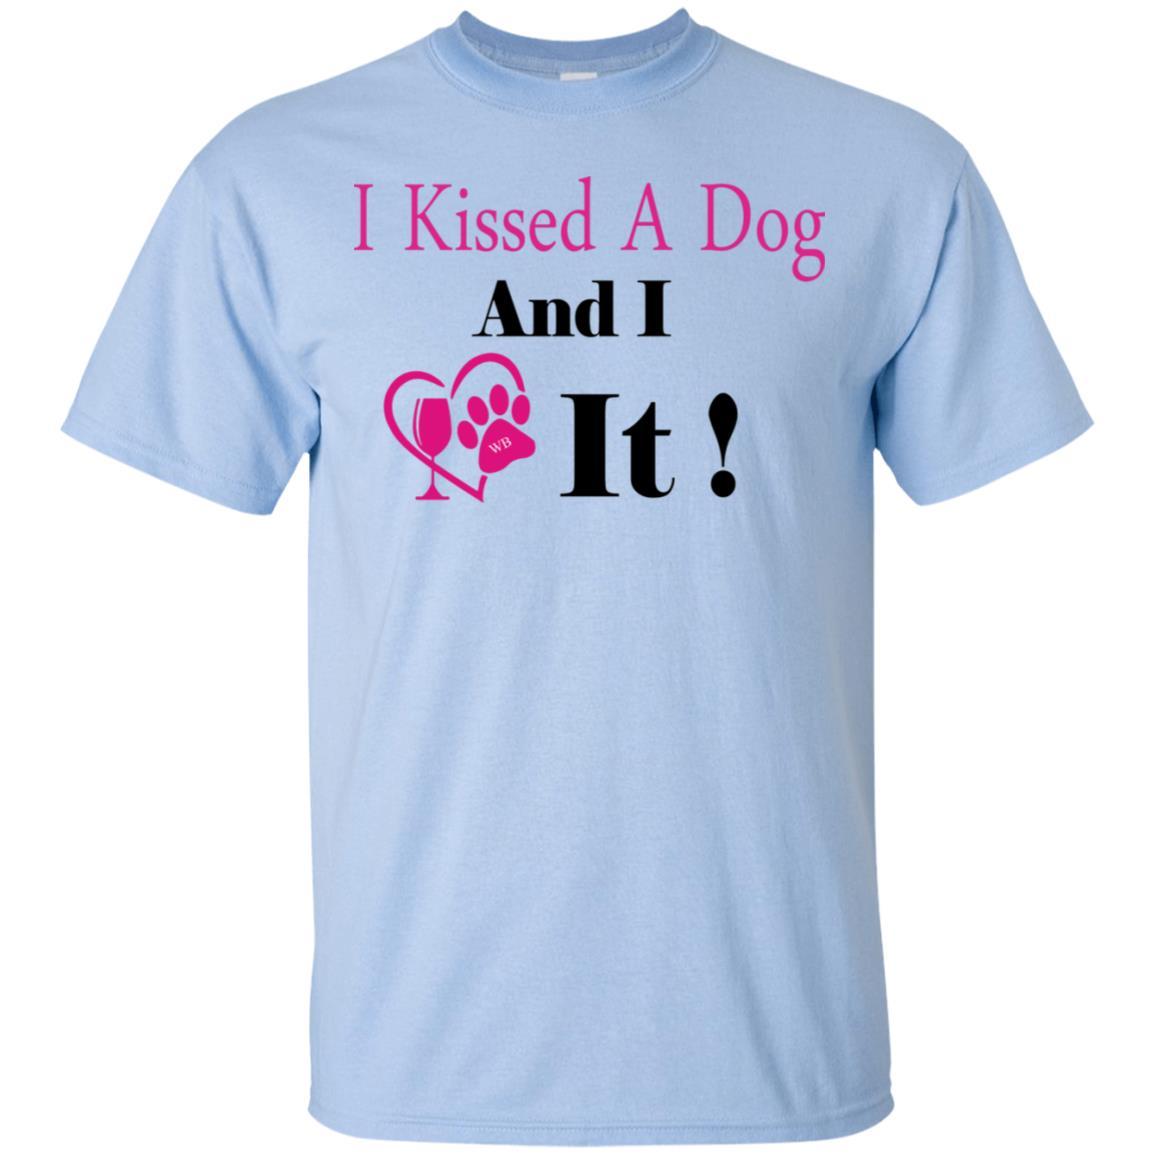 T-Shirts Light Blue / S WineyBitches.co "I Kissed A Dog And I Loved It:" Ultra Cotton T-Shirt WineyBitchesCo